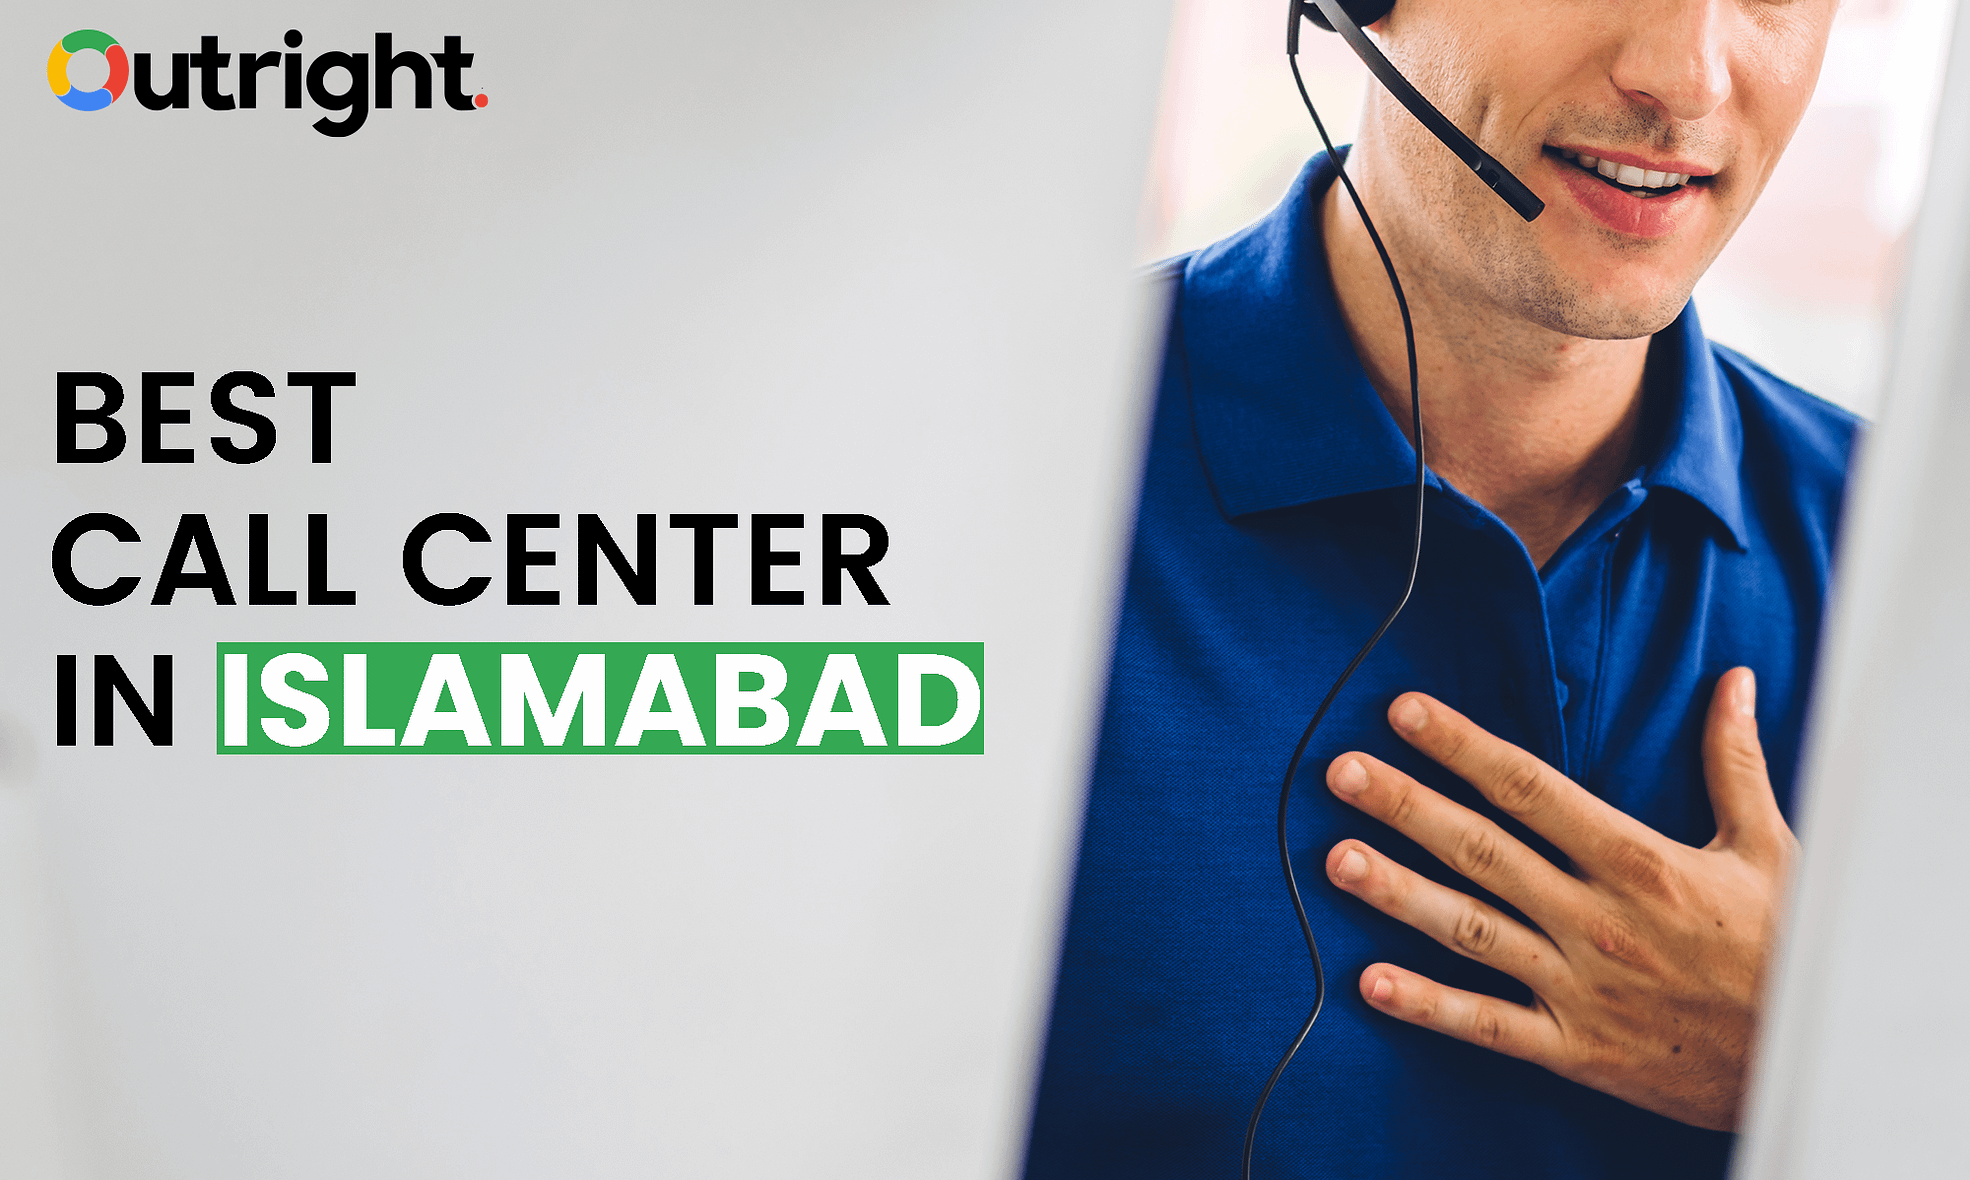 BEST-CALL-CENTER-IN-ISLAMABAD